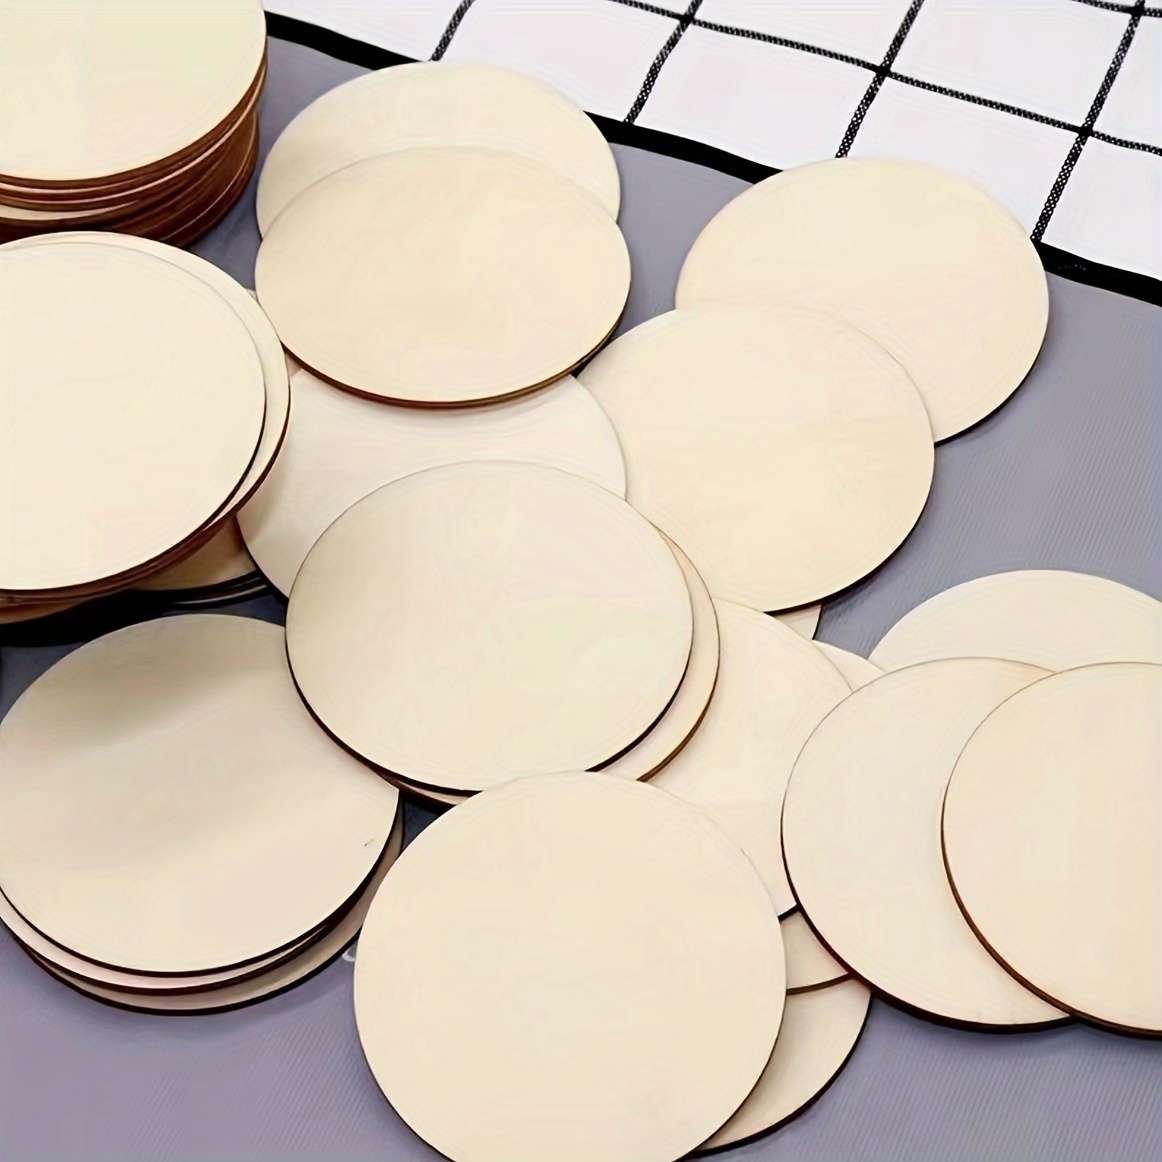 20PCS Natural Wood Pieces Slice Round Unfinished Wooden Discs for Crafts  Centerpieces DIY Ornaments 4Inch & 5.9Inch